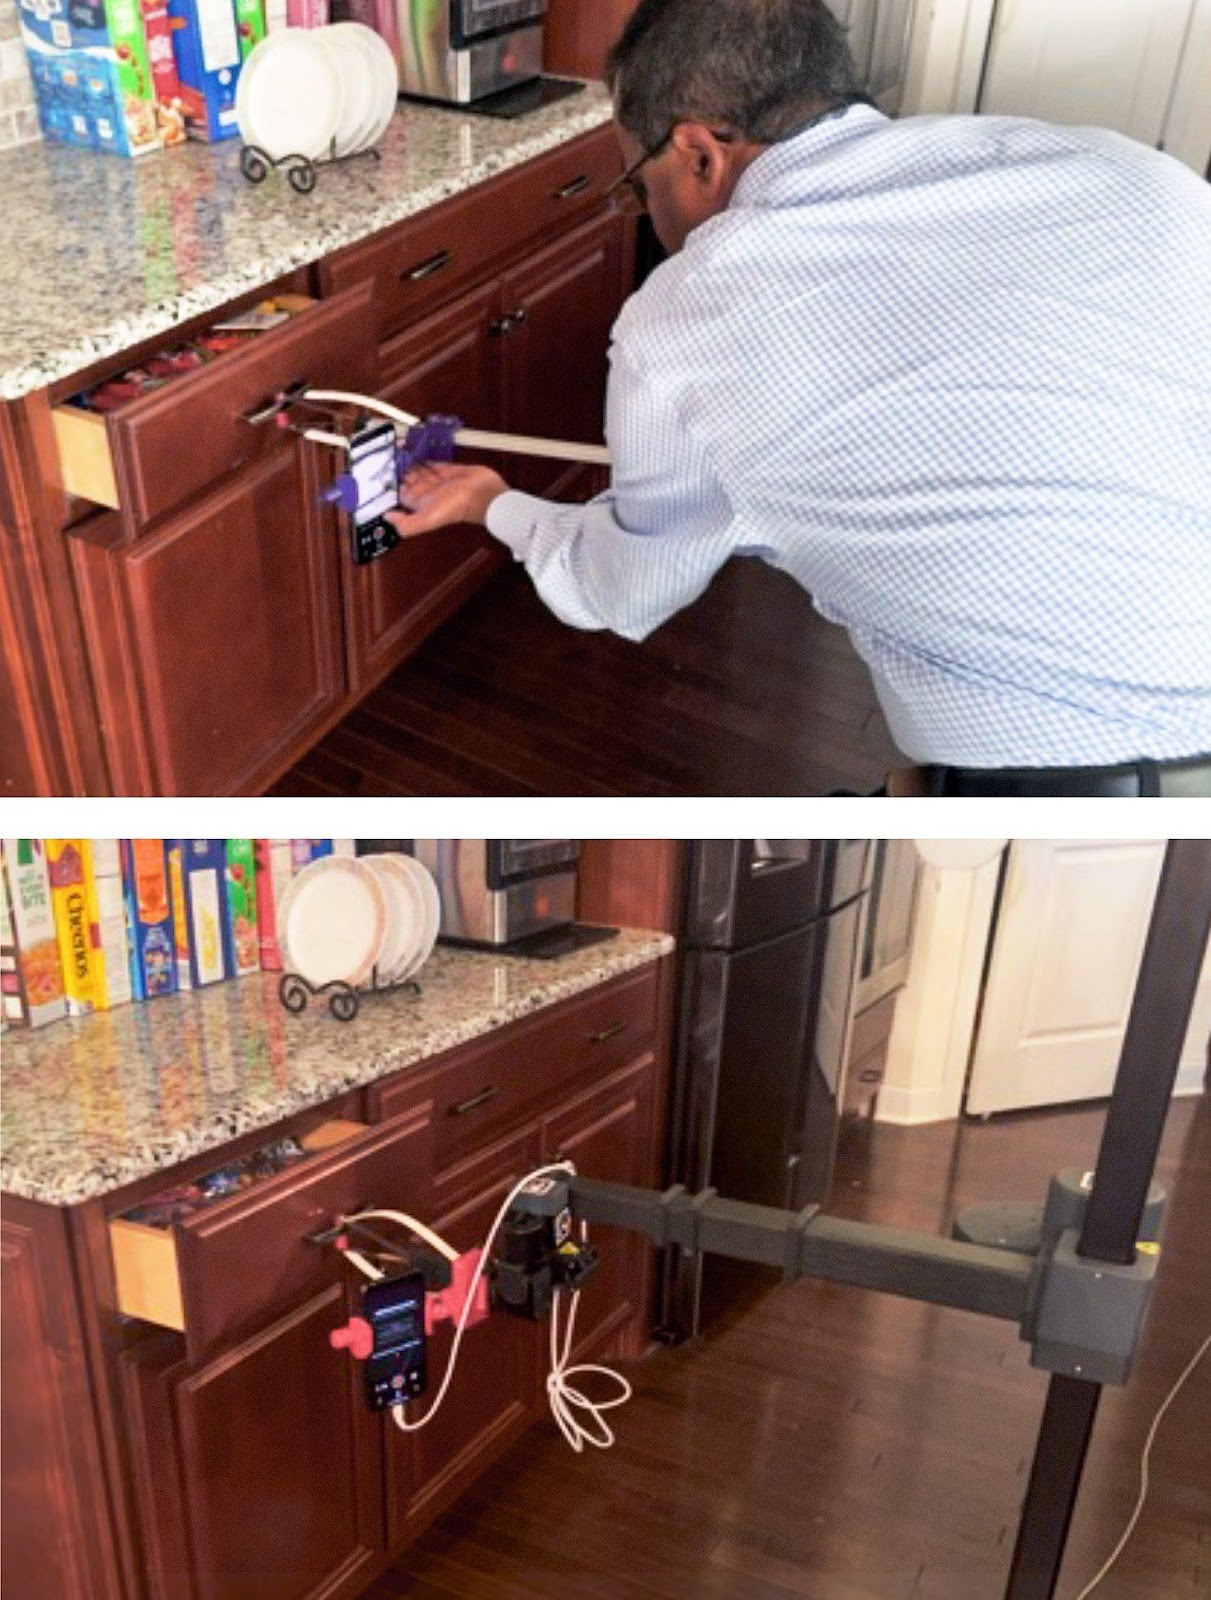 top frame shows a person recording themself opening a kitchen drawer with a grabber, and the bottom shows a robot attempting the same action